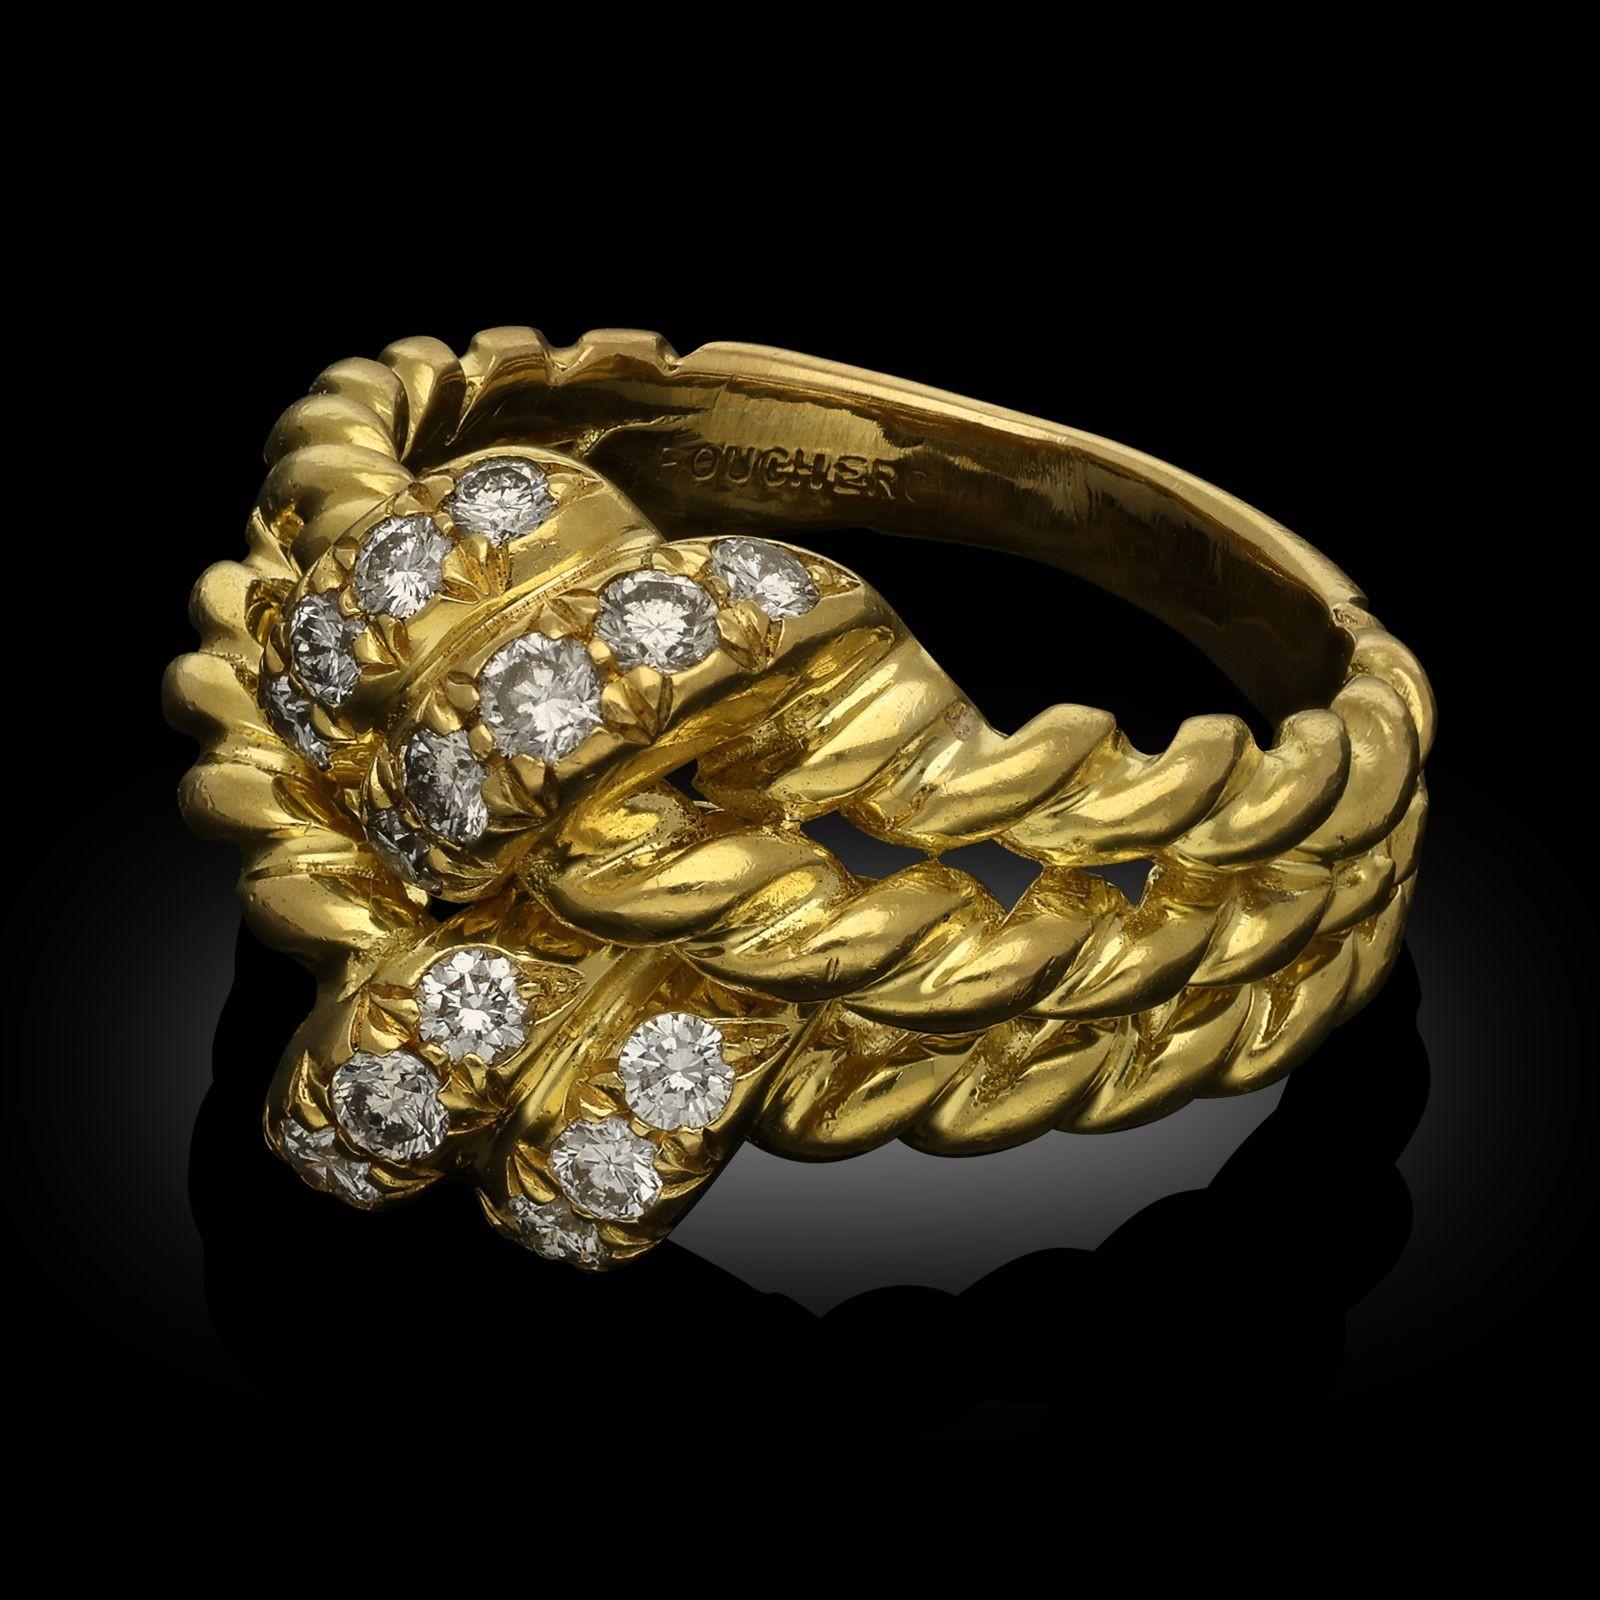 An 18ct yellow gold and diamond knot ring by Boucheron c.1970. The ring is designed as a twisted rope double knot with the central section set with round brilliant cut diamonds all set in 18ct yellow gold.
Maker
Boucheron
Period
circa